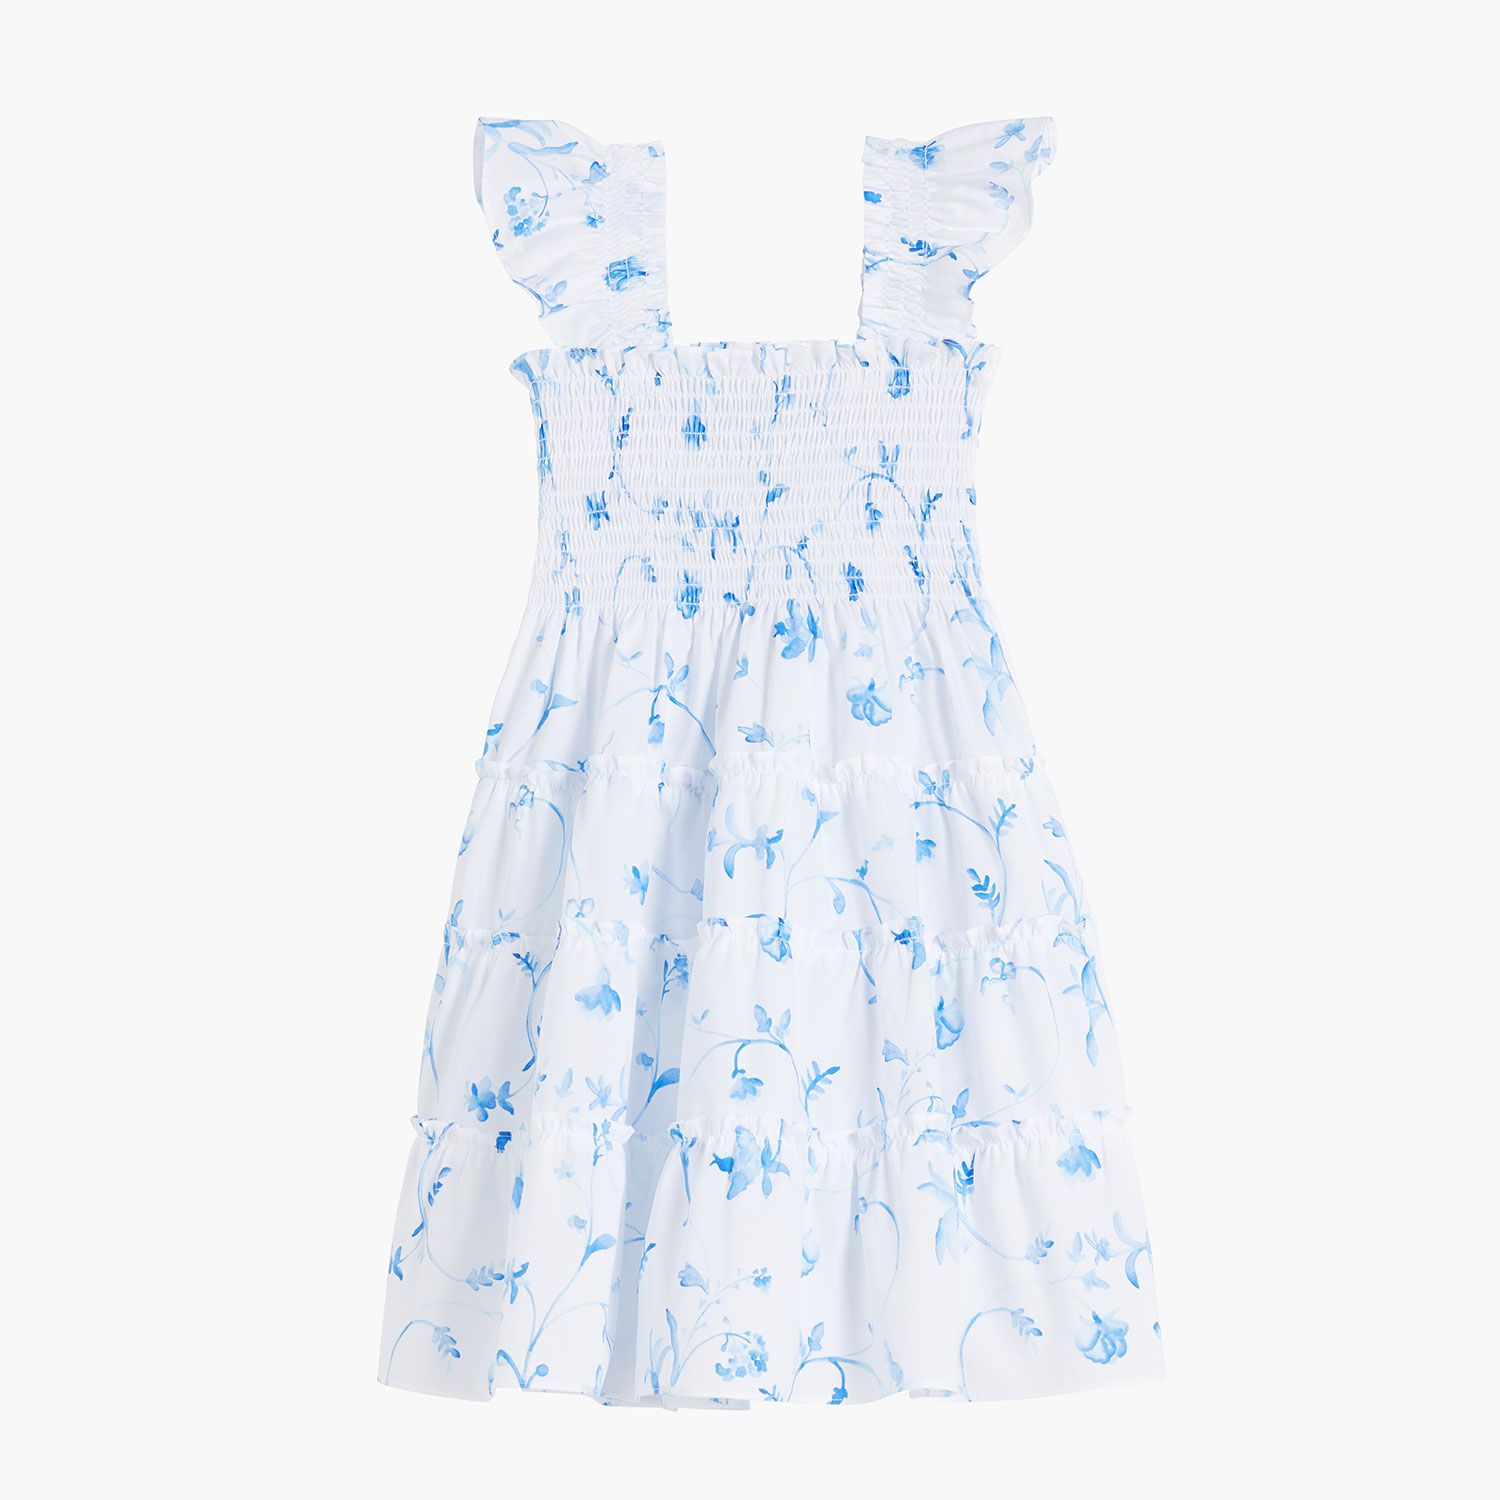 Hill House Home Nap Dresses for Kids Are Now Available | PEOPLE.com